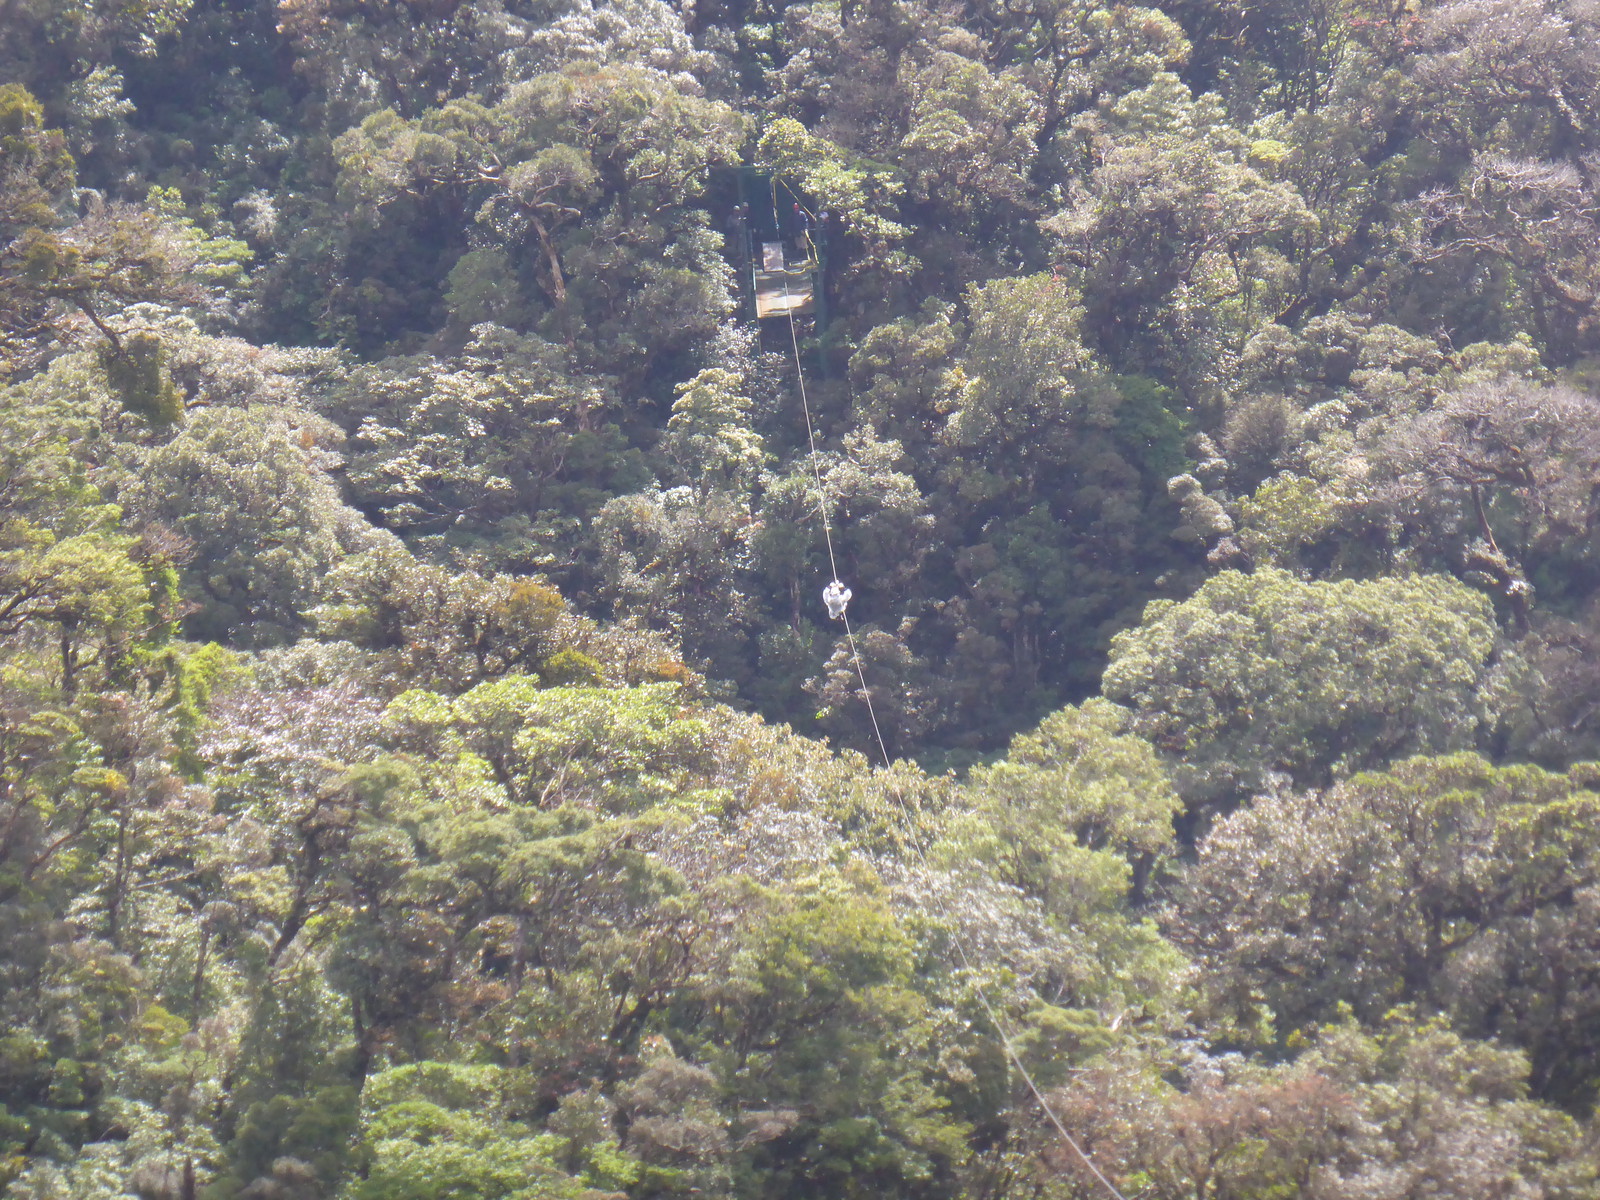 Ziplining the cloud forest: the tiny blob in the middle of the photograph is Mark